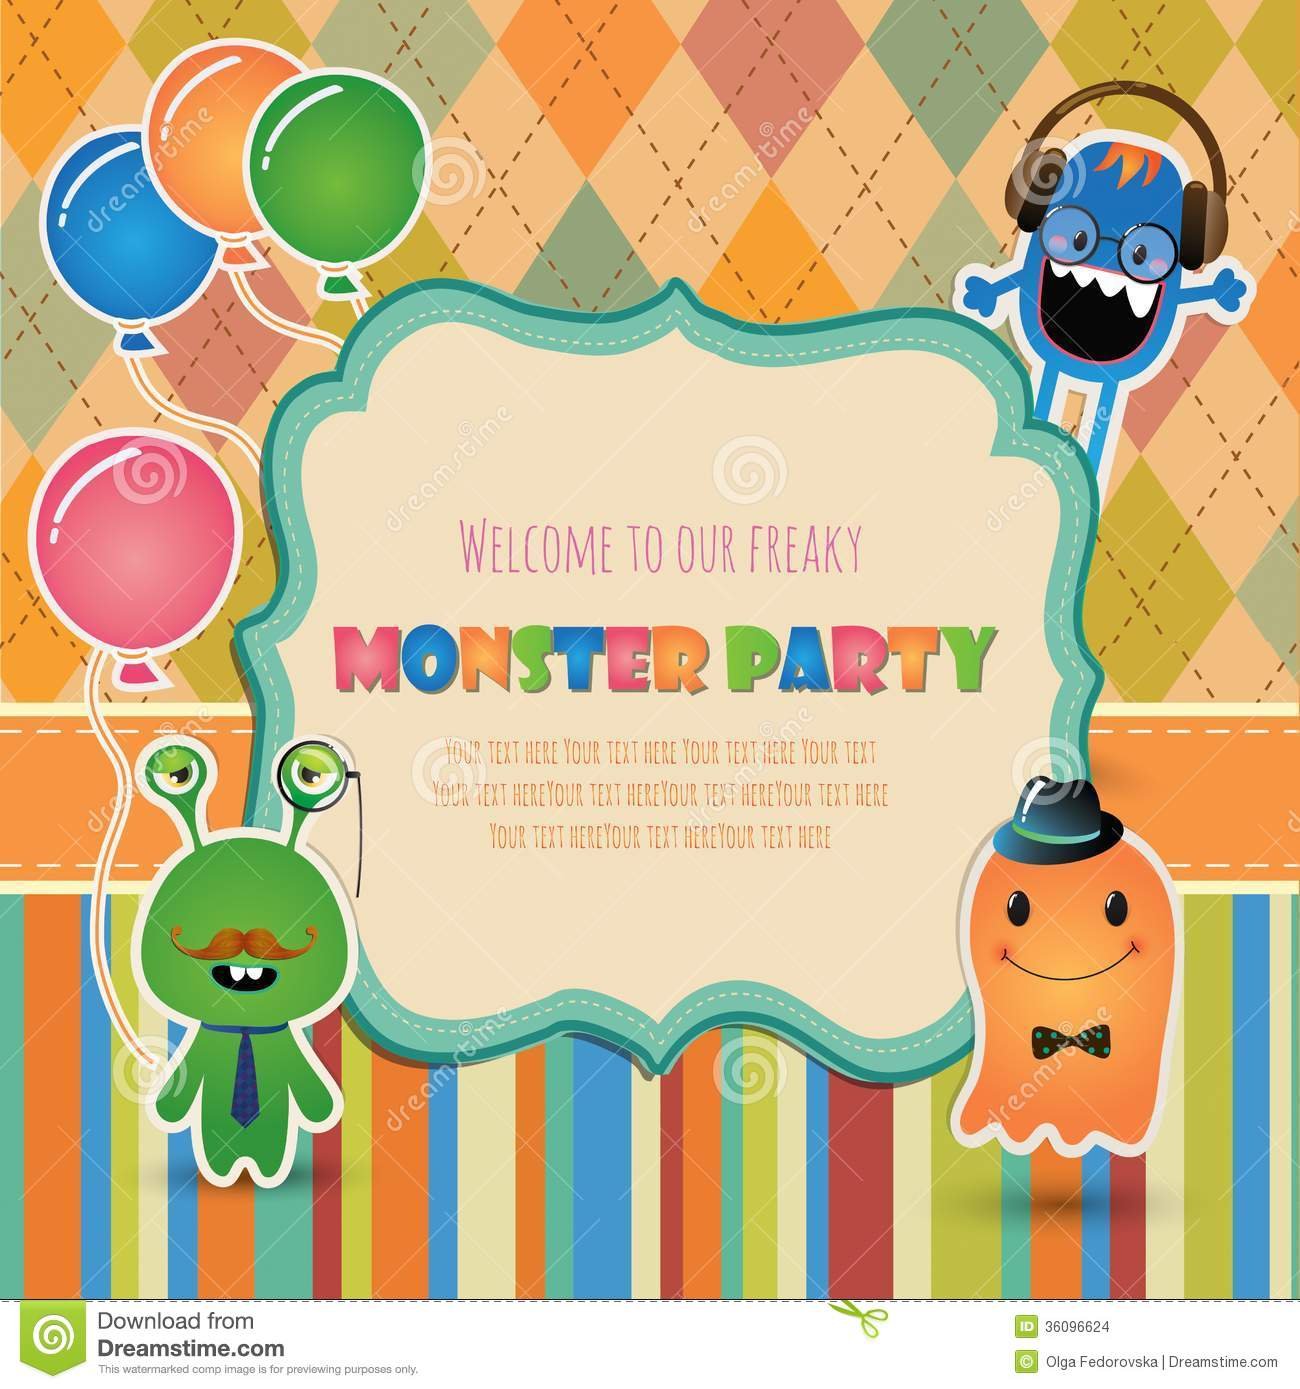 Monster Party Invitation Card Design Stock Images